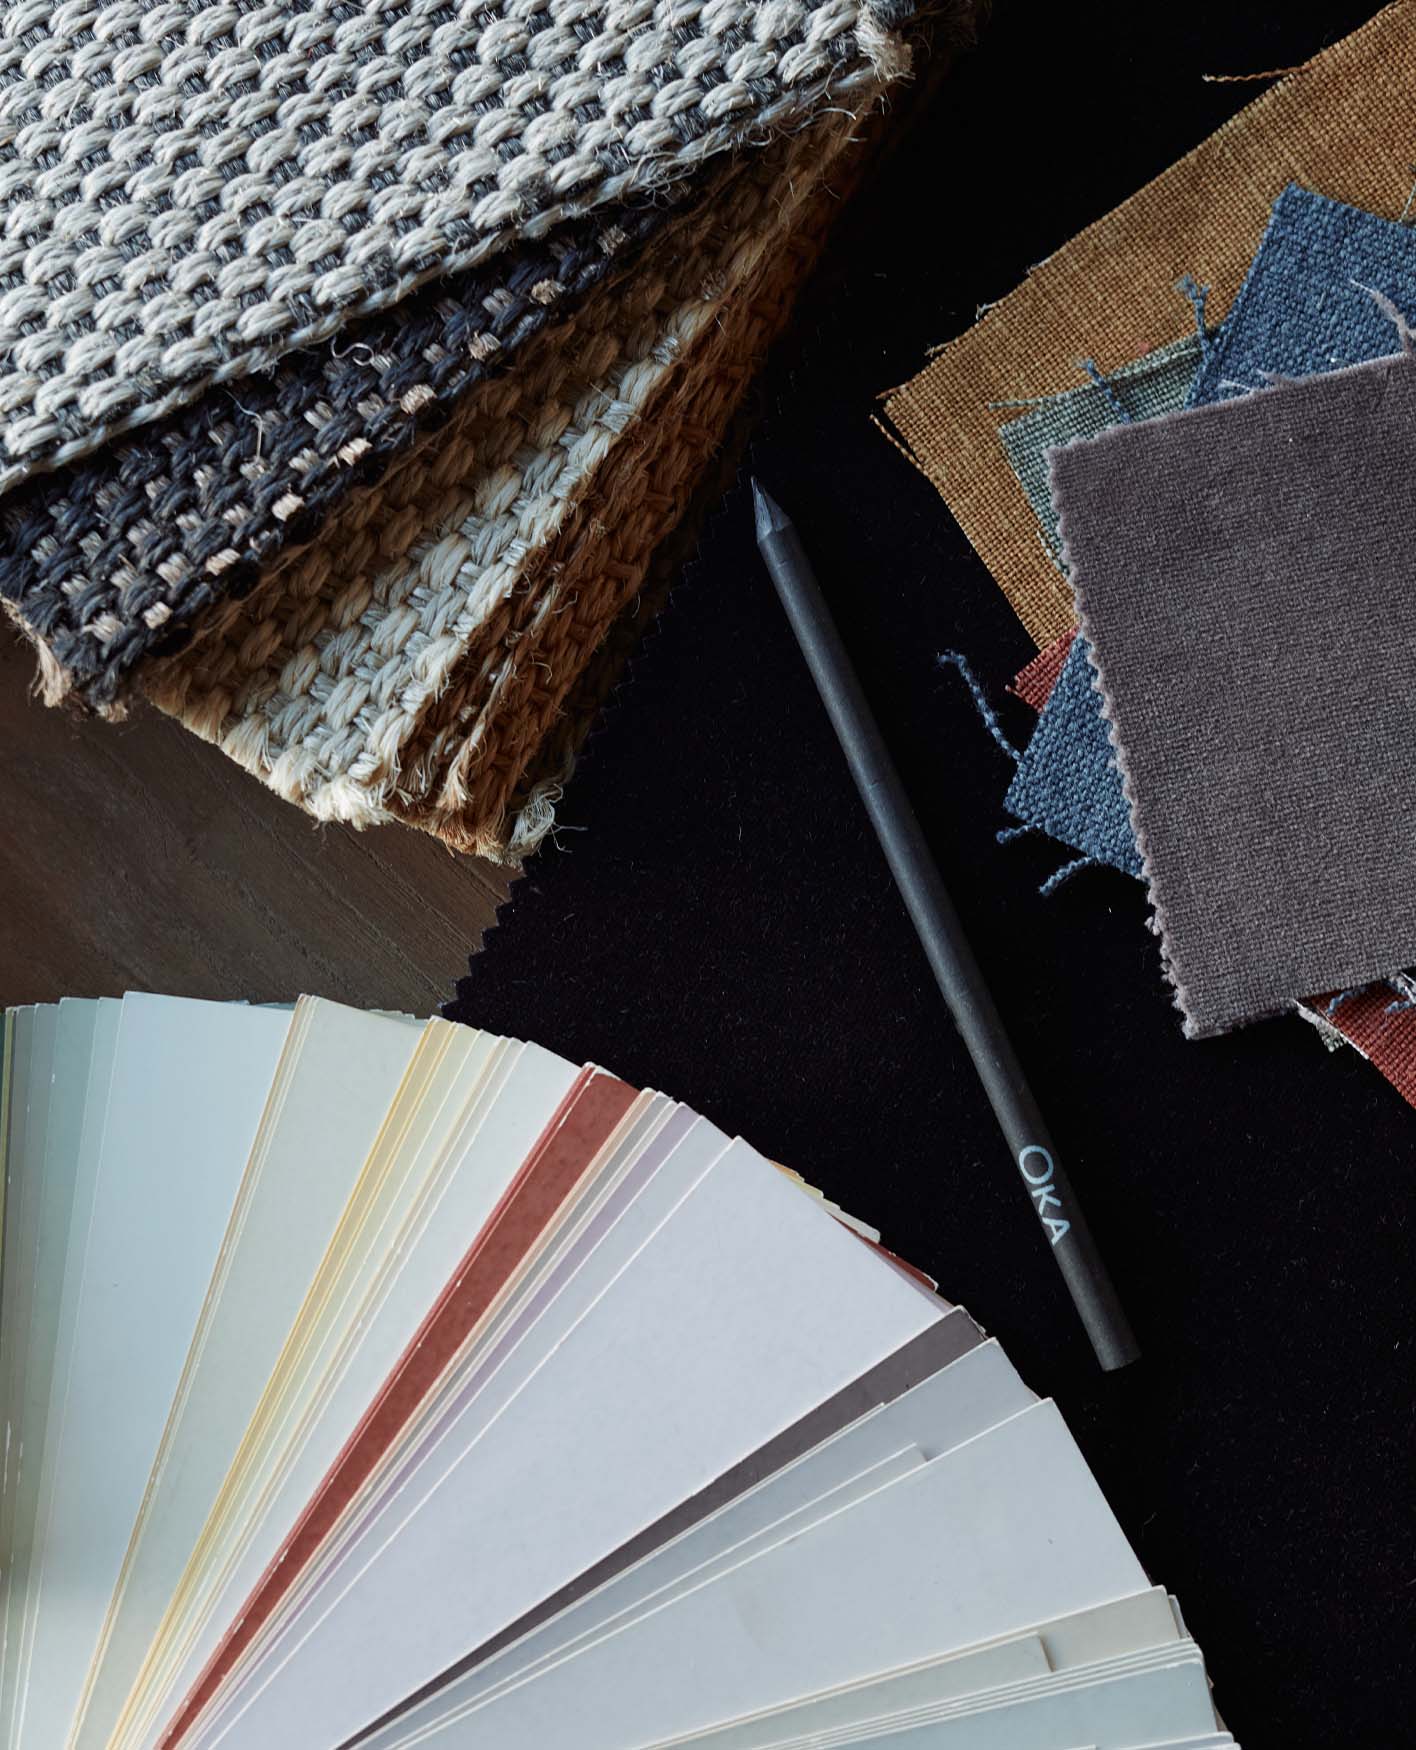 Fabric and colour swatches arranged on a table